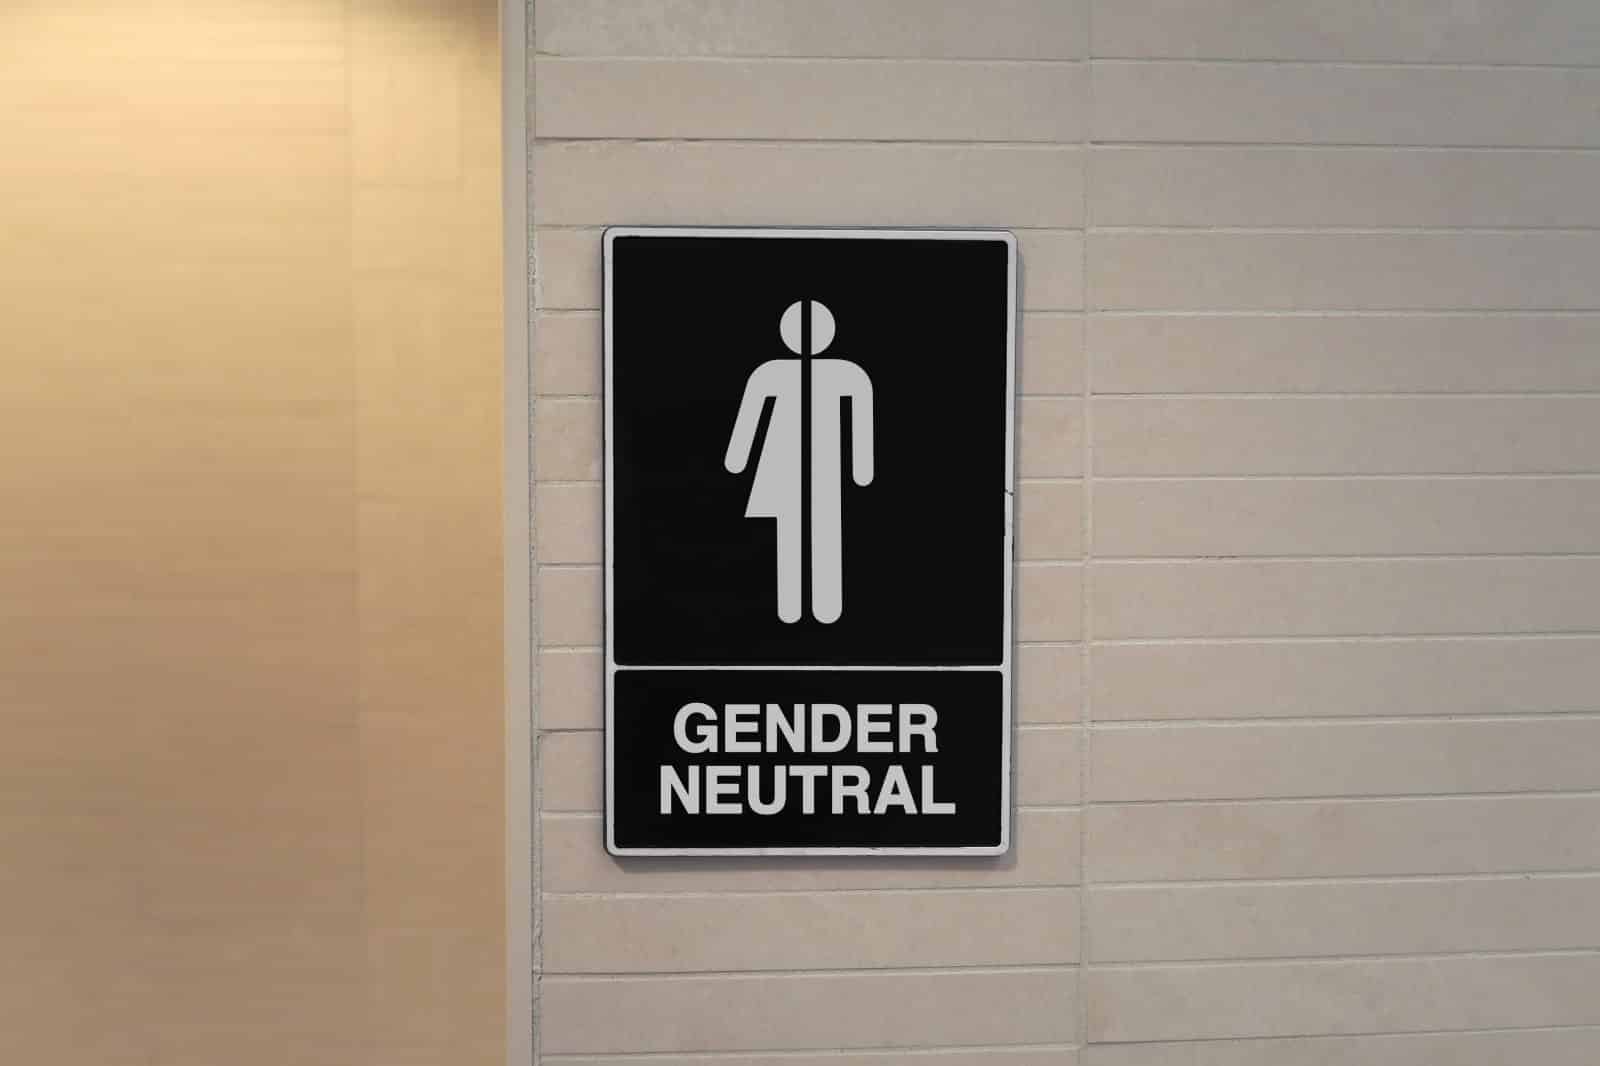 <p class="wp-caption-text">Image Credit: Shutterstock / John Arehart</p>  <p>The quest for gender-neutral bathrooms and amenities isn’t just a political statement; it’s a practical one, especially in the travel context. Trans travelers lead the conversation, urging airports, hotels, and attractions to adapt. It’s a move that benefits not just the trans community but families, disabled individuals, and anyone who values privacy and convenience.</p>